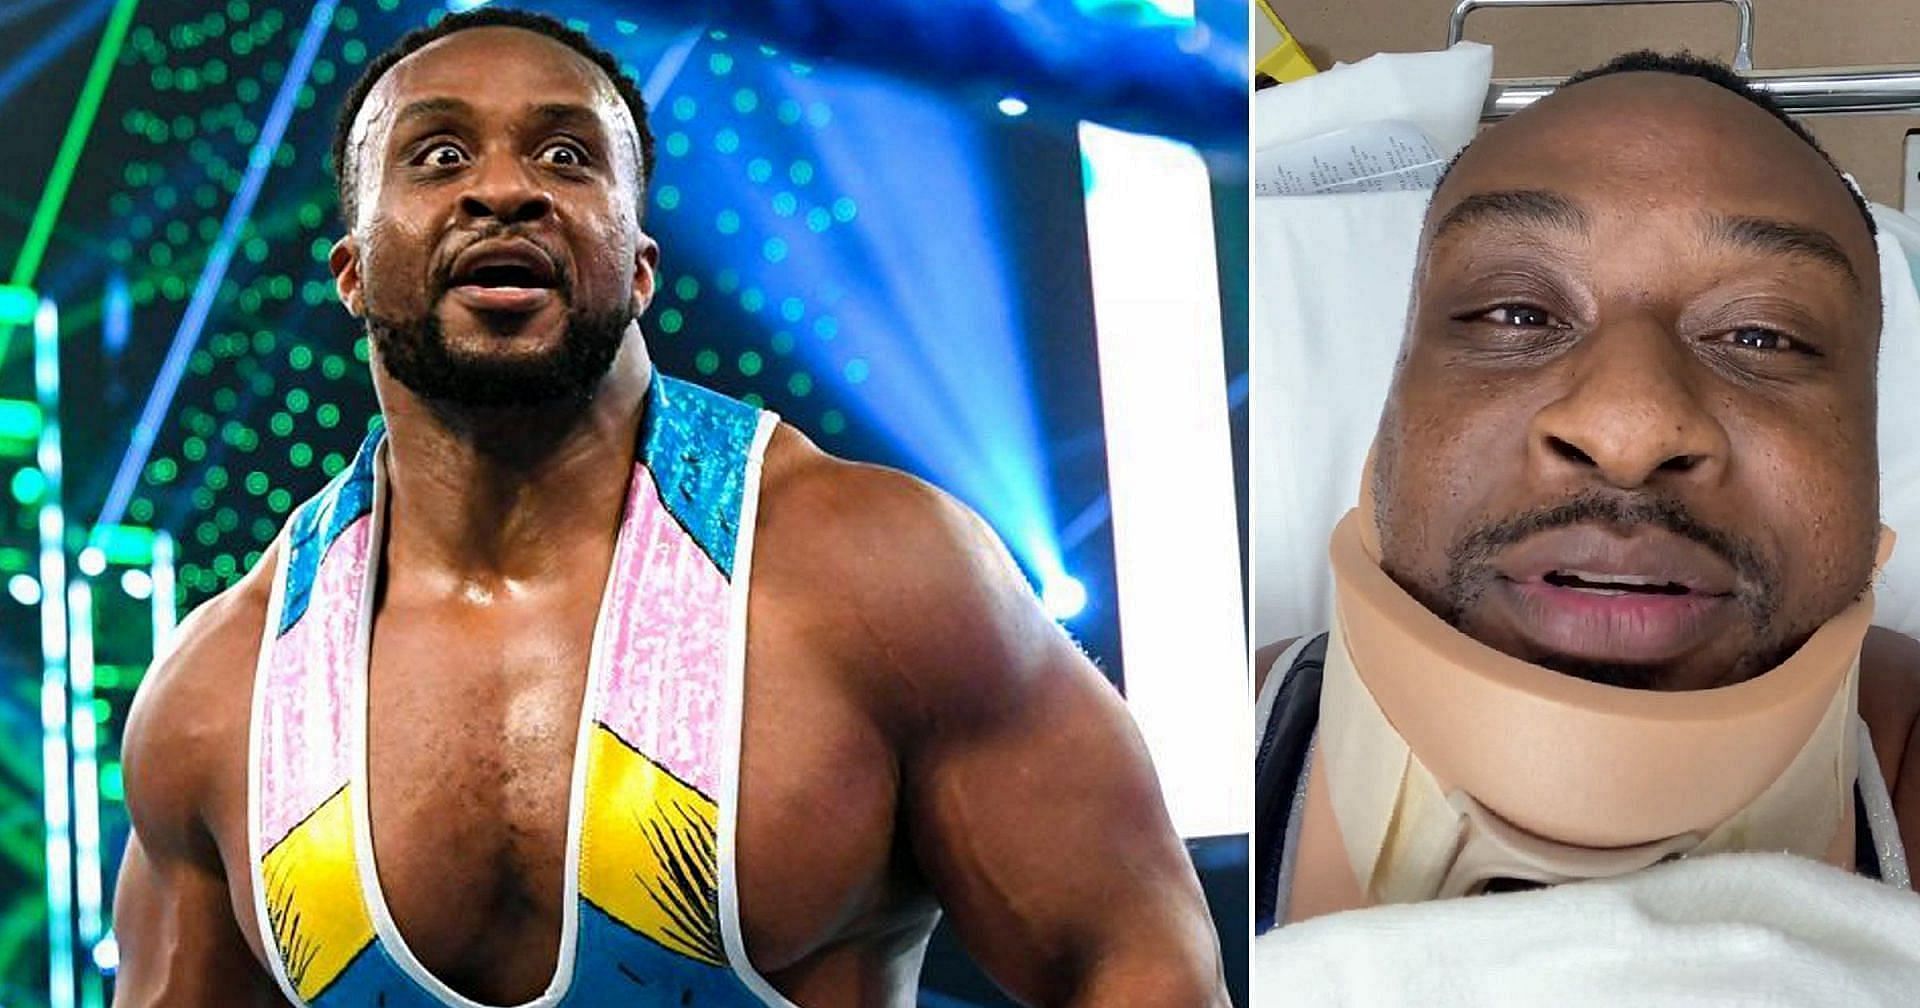 WWE star Big E has been out with a serious neck injury